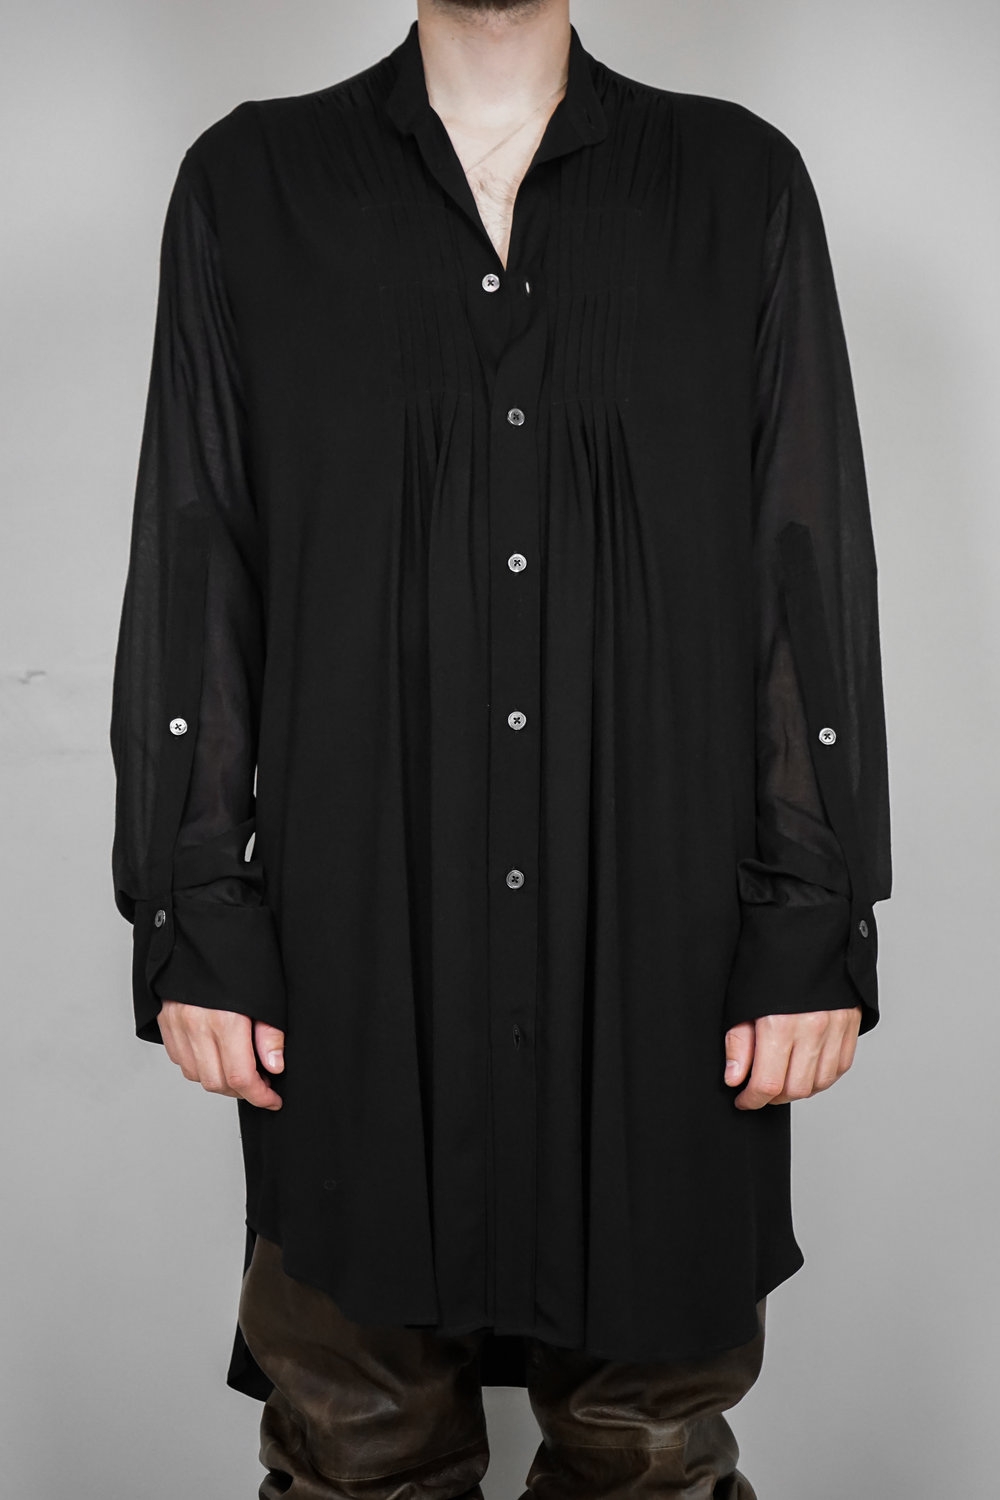 Ann Demeulemeester – Mens – Shirt – Black – Long Sleeved – Rayon-Cotton & Cashmere – Gathered Front